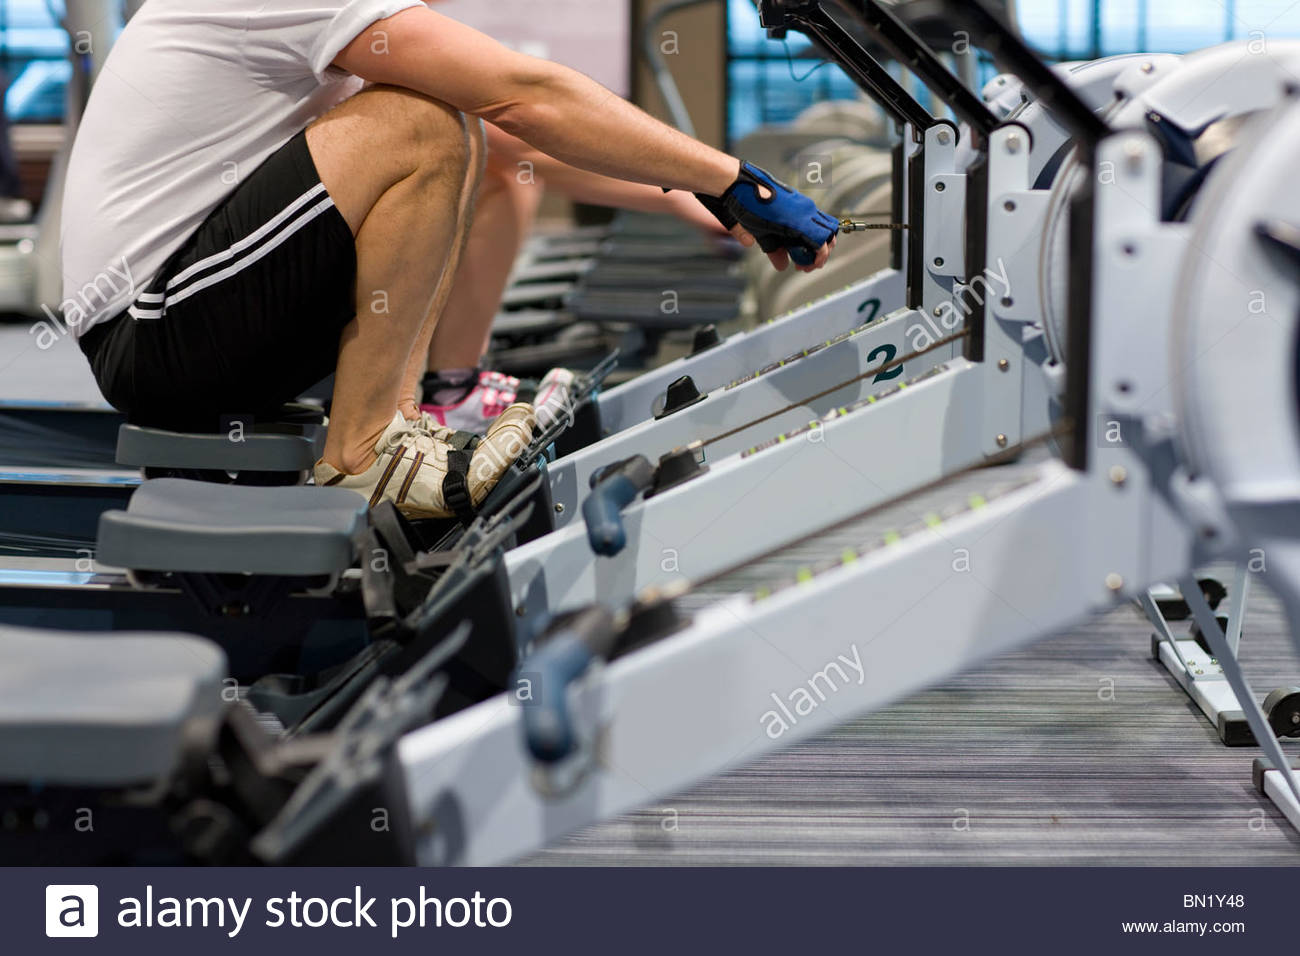 man-working-out-on-rowing-machine-in-hea